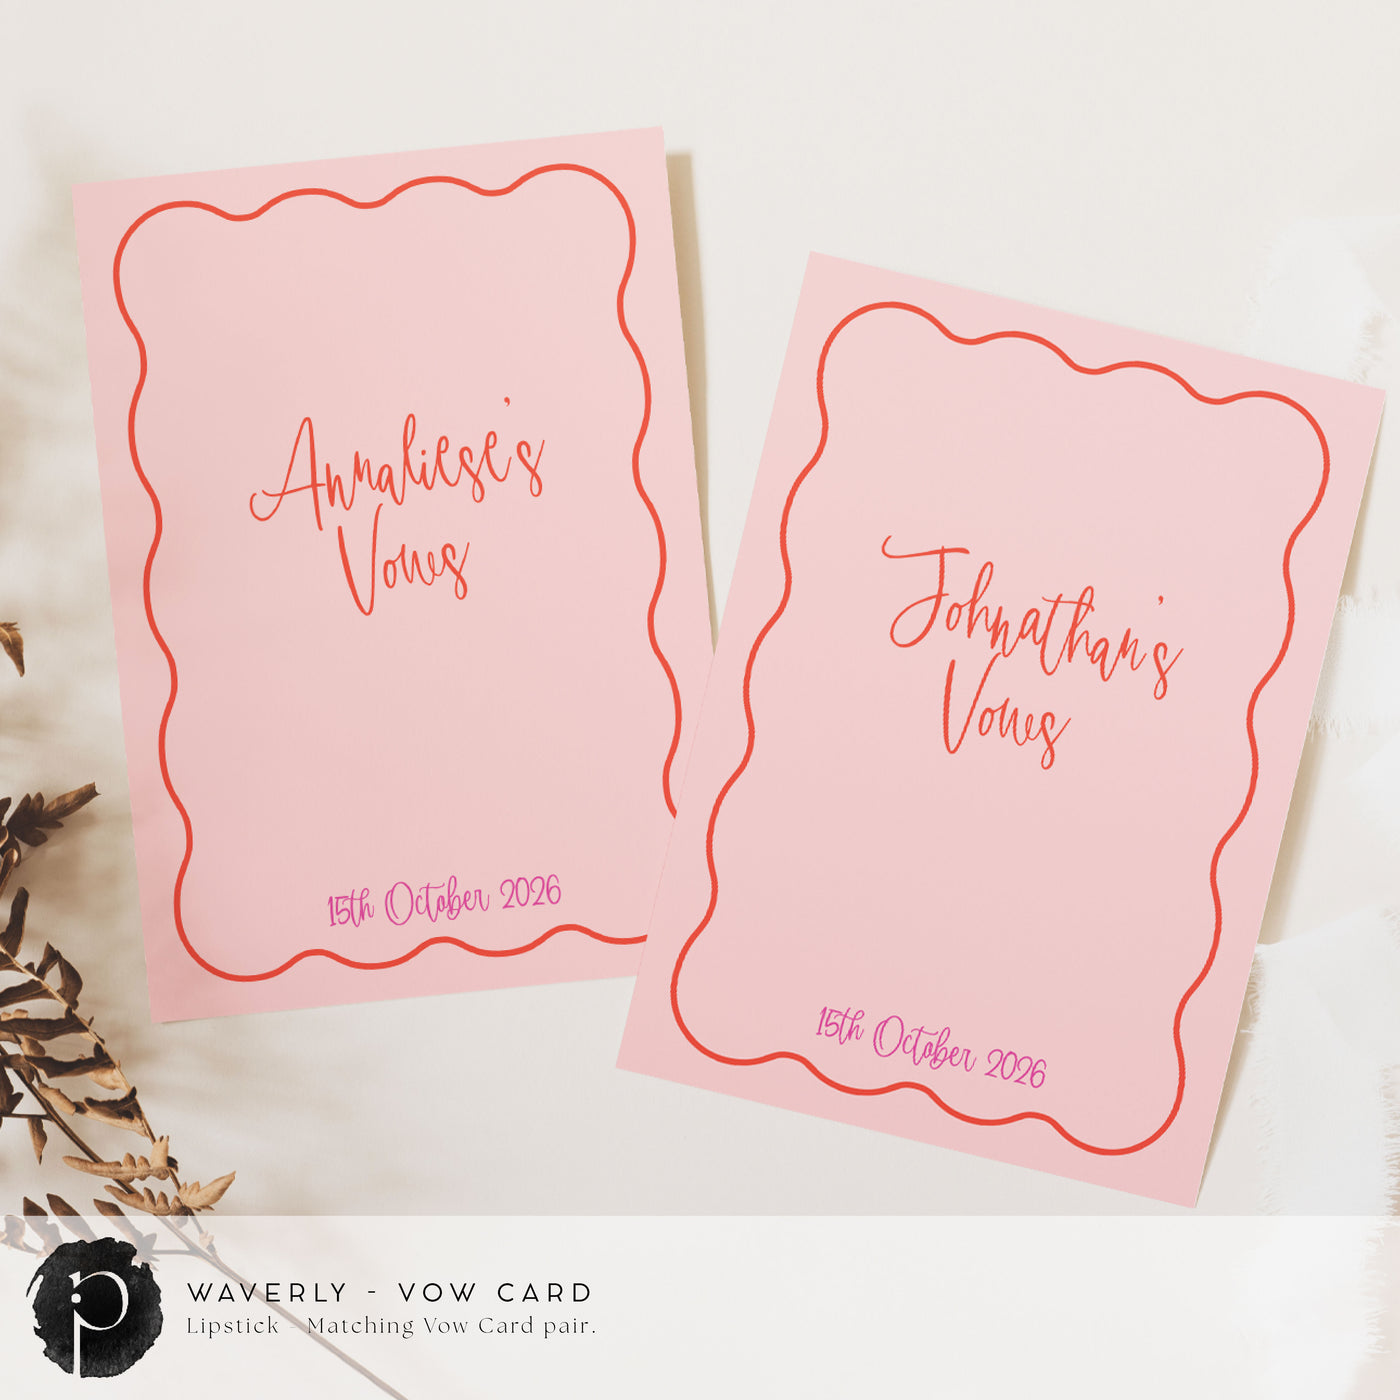 A pair of vow cards to write your wedding vows on in a modern retro style with bright lipstick red and magenta or fuschia writing on a rosy pink background